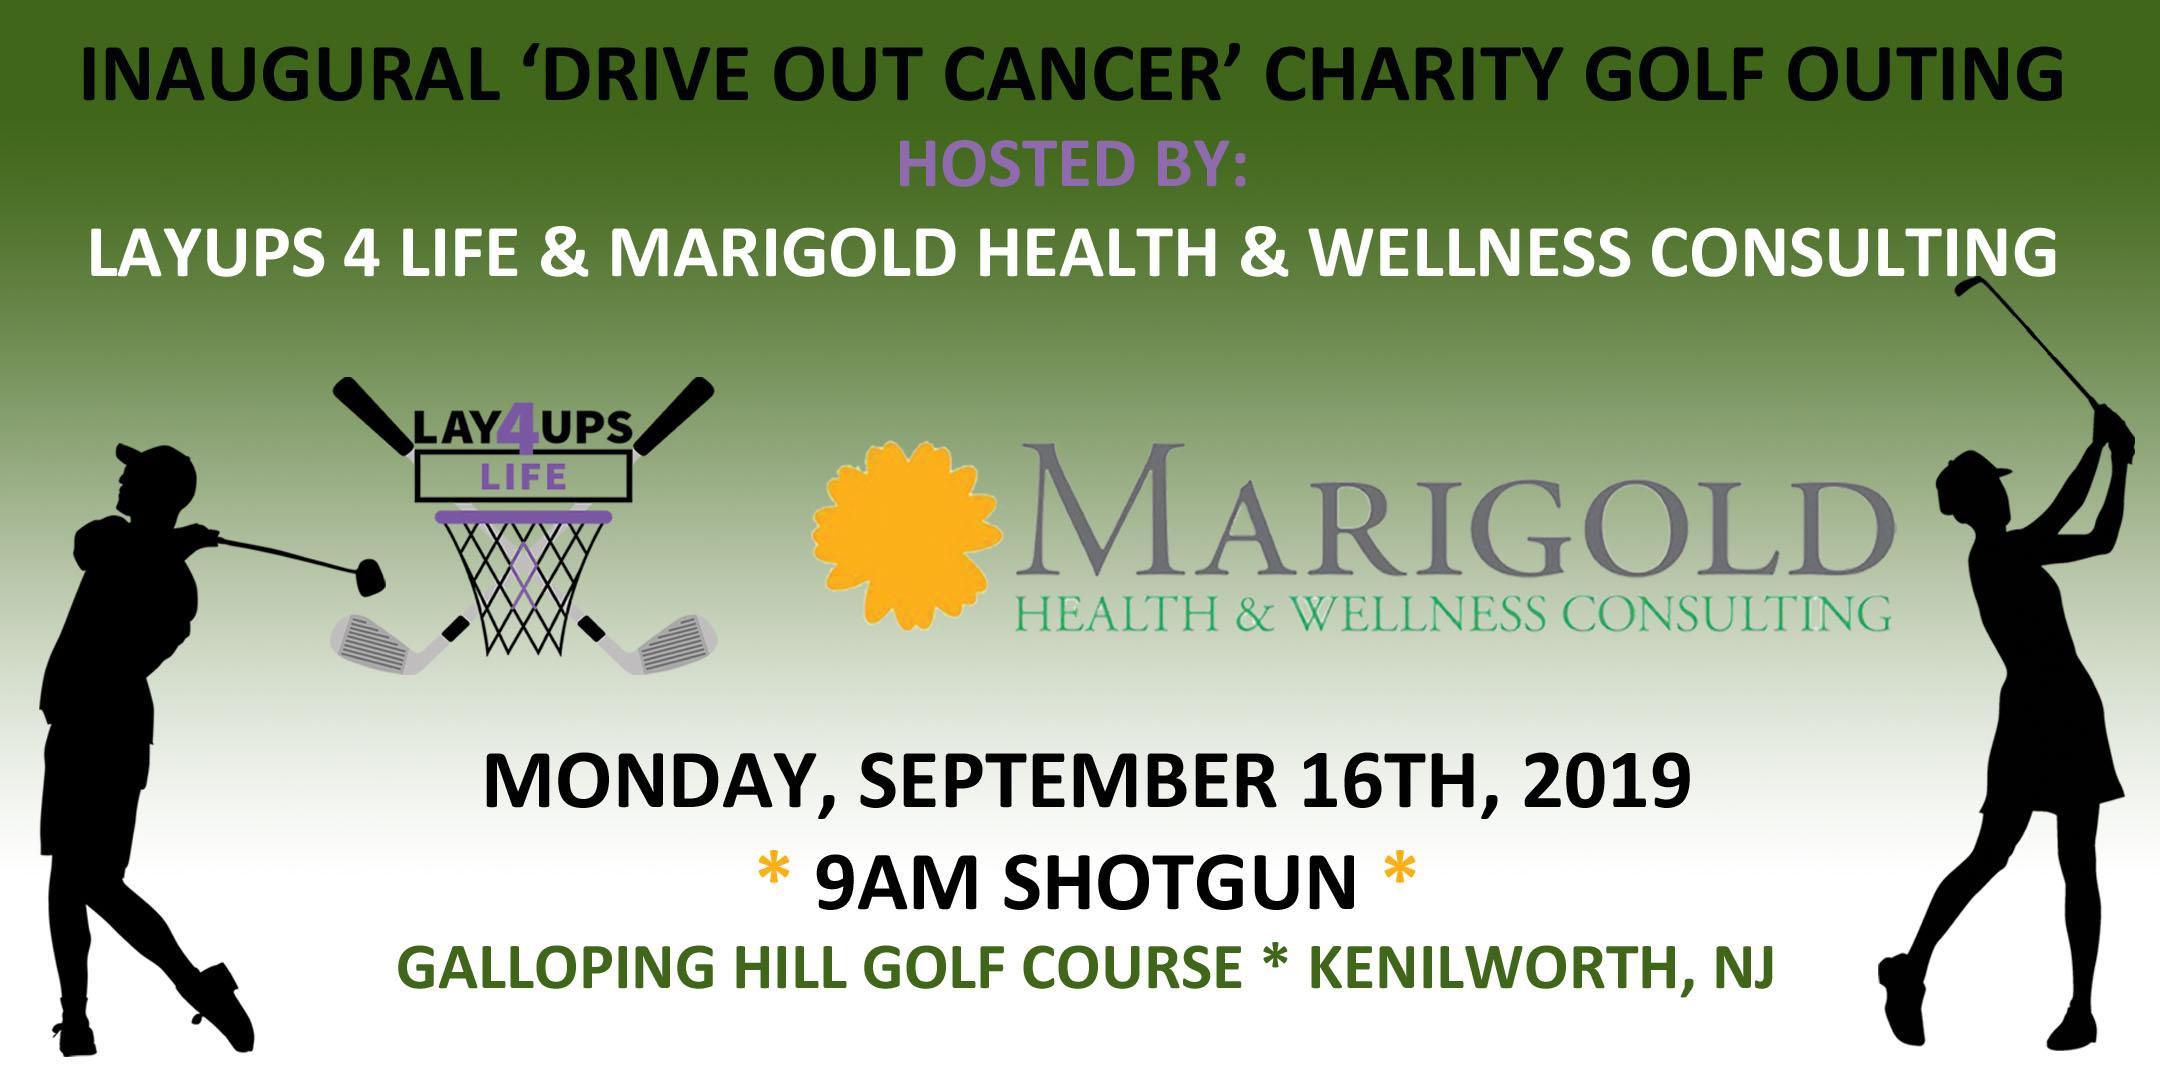 Inagural 'Drive Out Cancer' Charity Golf Outing